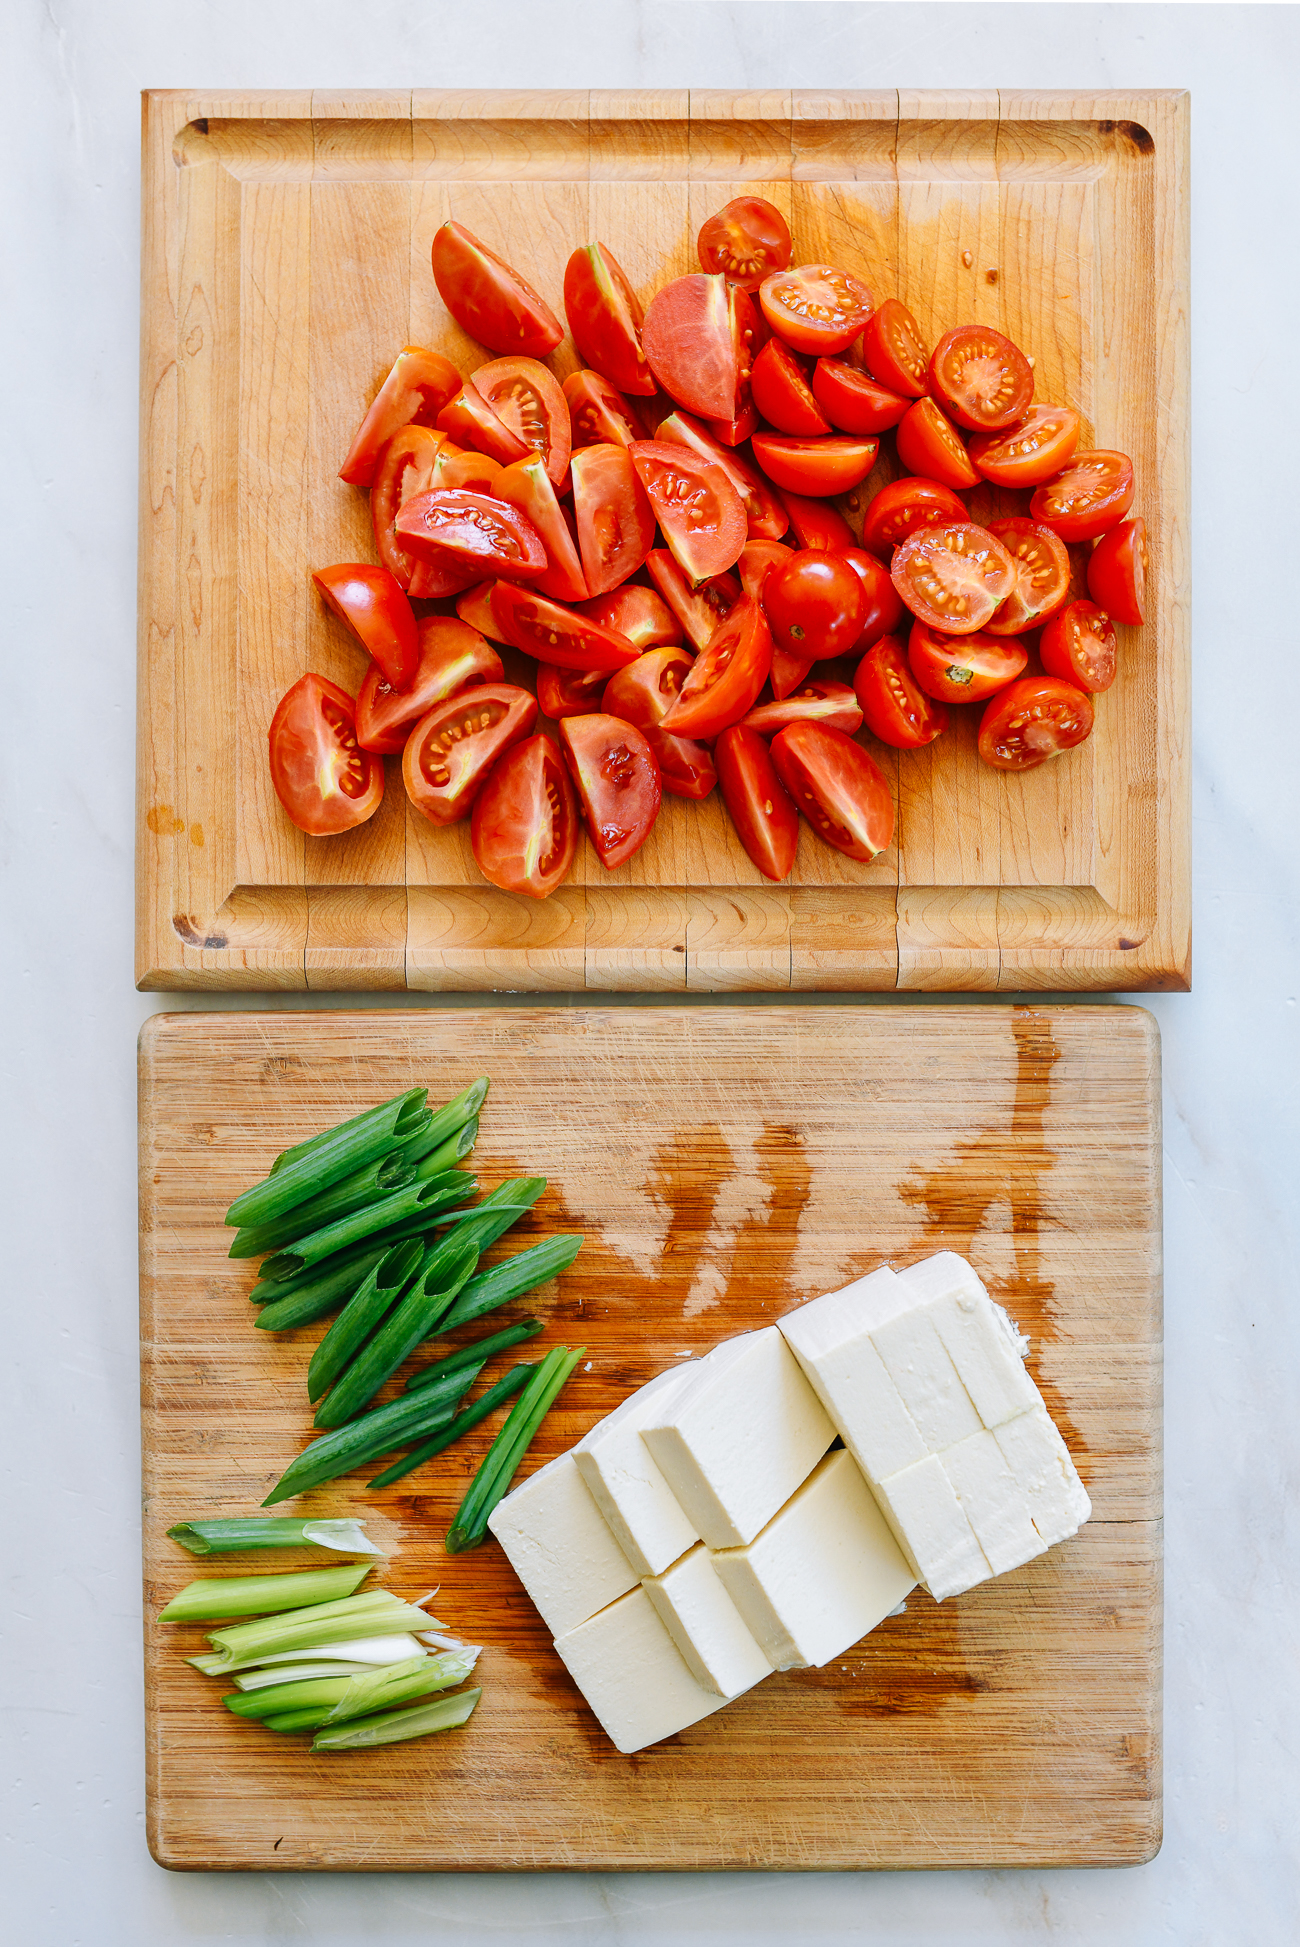 Tomatoes, tofu, and scallions on cutting boards